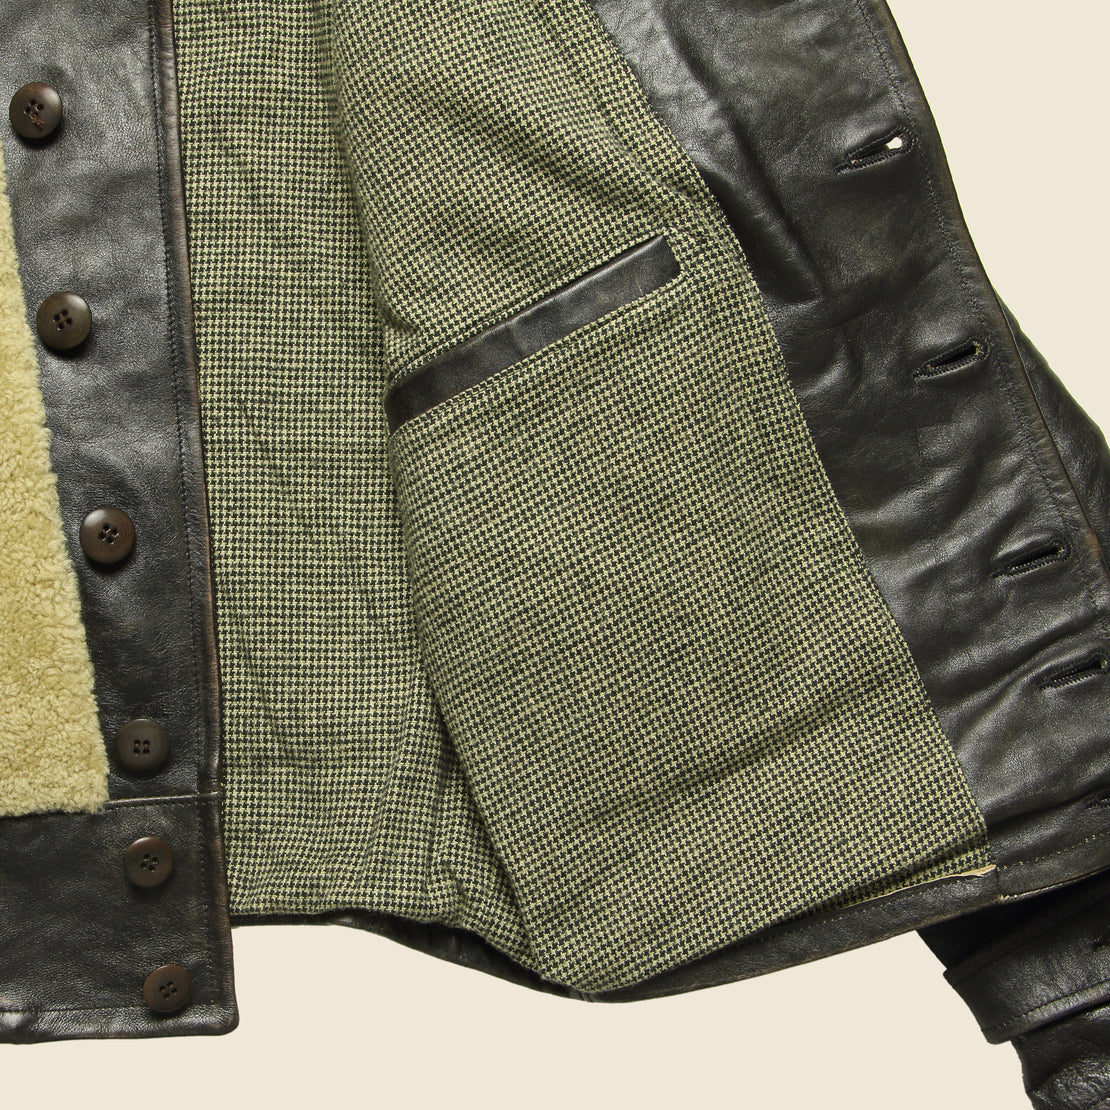 Shearling-Leather Motorcycle Jacket - Black/Cream - RRL - STAG Provisions - Outerwear - Coat / Jacket